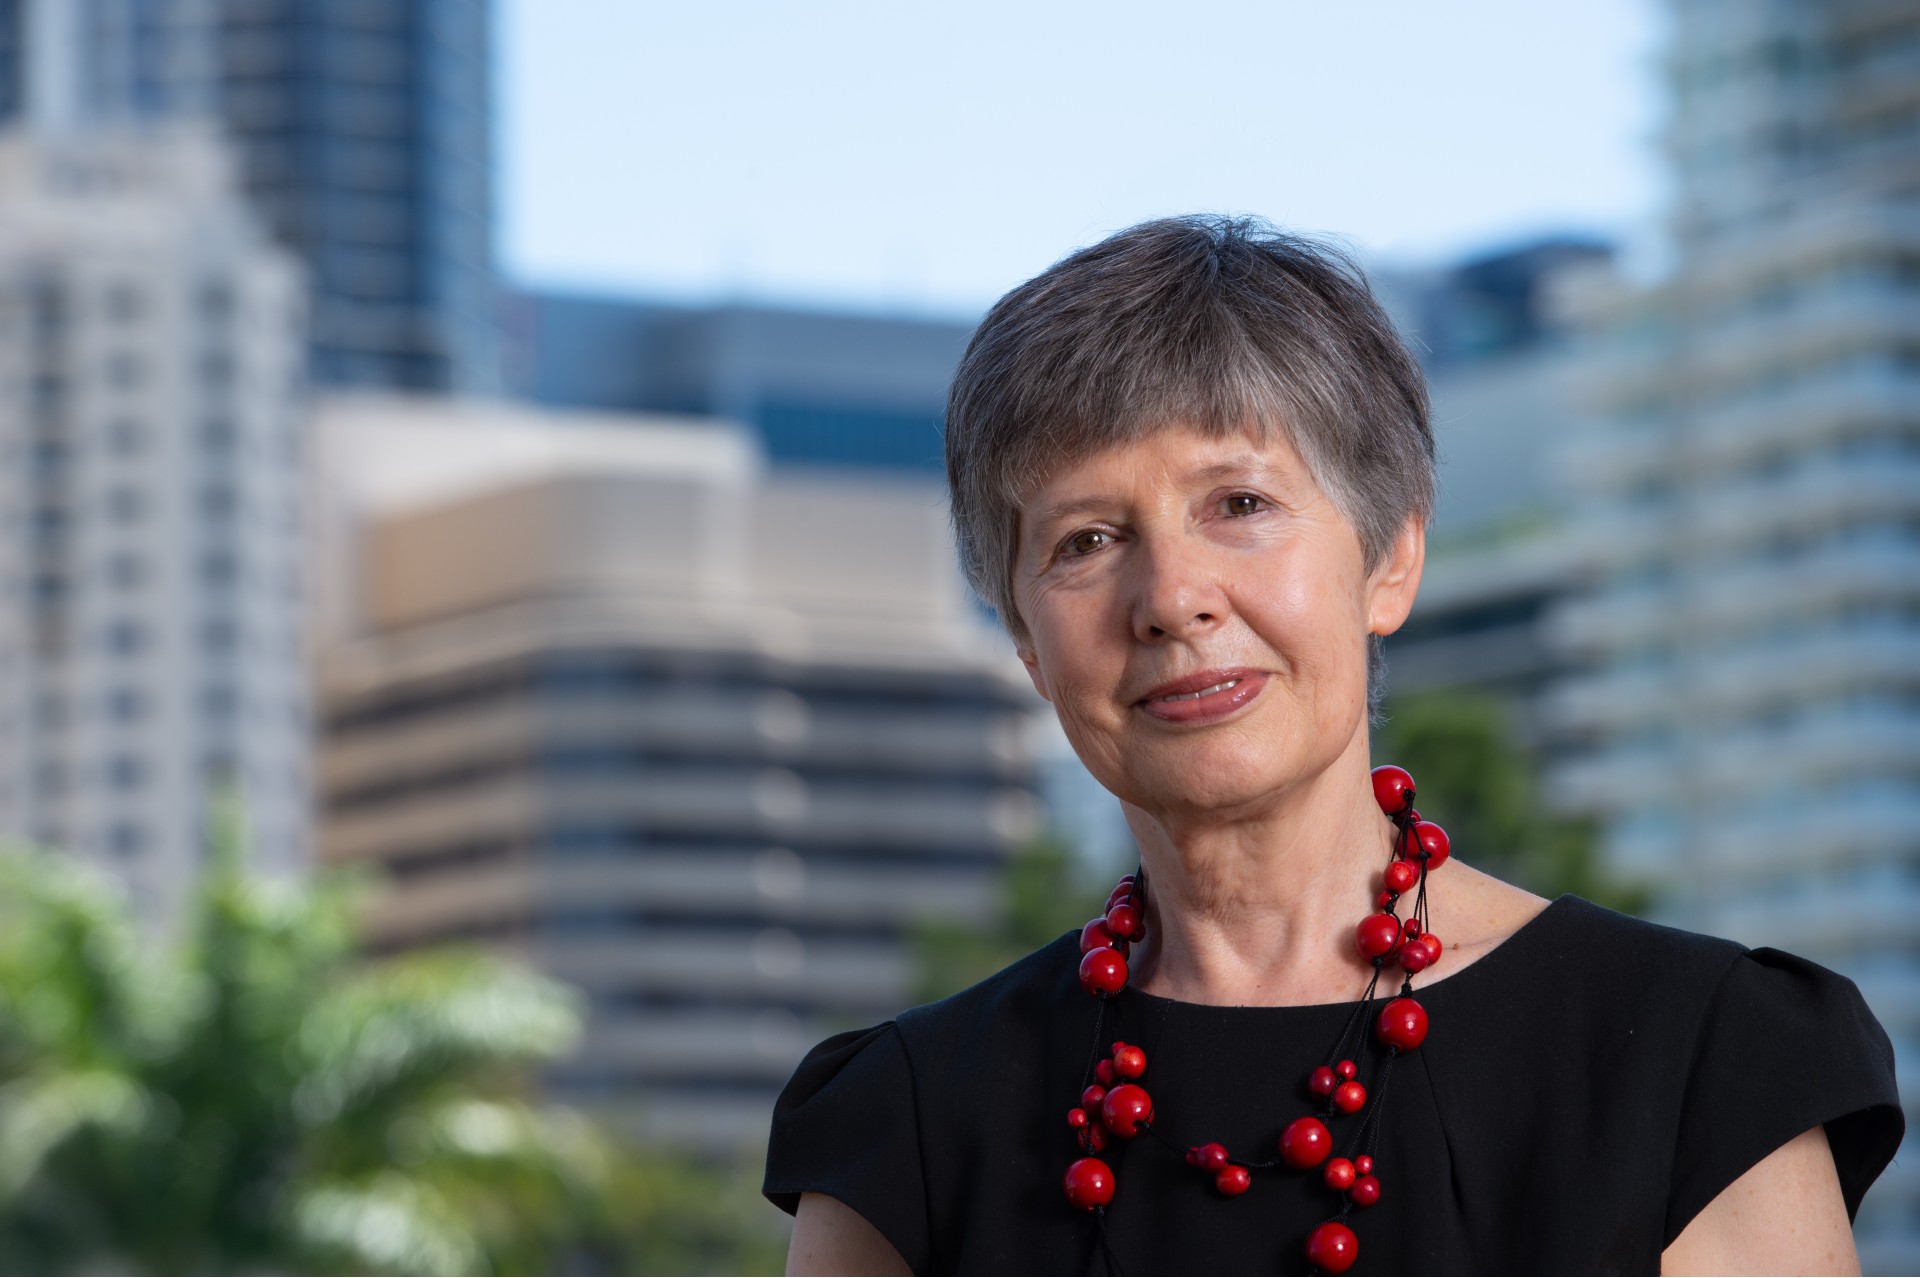 Lidia Morawska is a Professor in the School of Earth and Atmospheric Sciences, at the Queensland University of Technology (QUT) in Brisbane, Australia. She is also the Director of the International Laboratory for Air Quality and Health (ILAQH) at QUT, which is a WHO Collaborating Centre on Air Quality and Health.